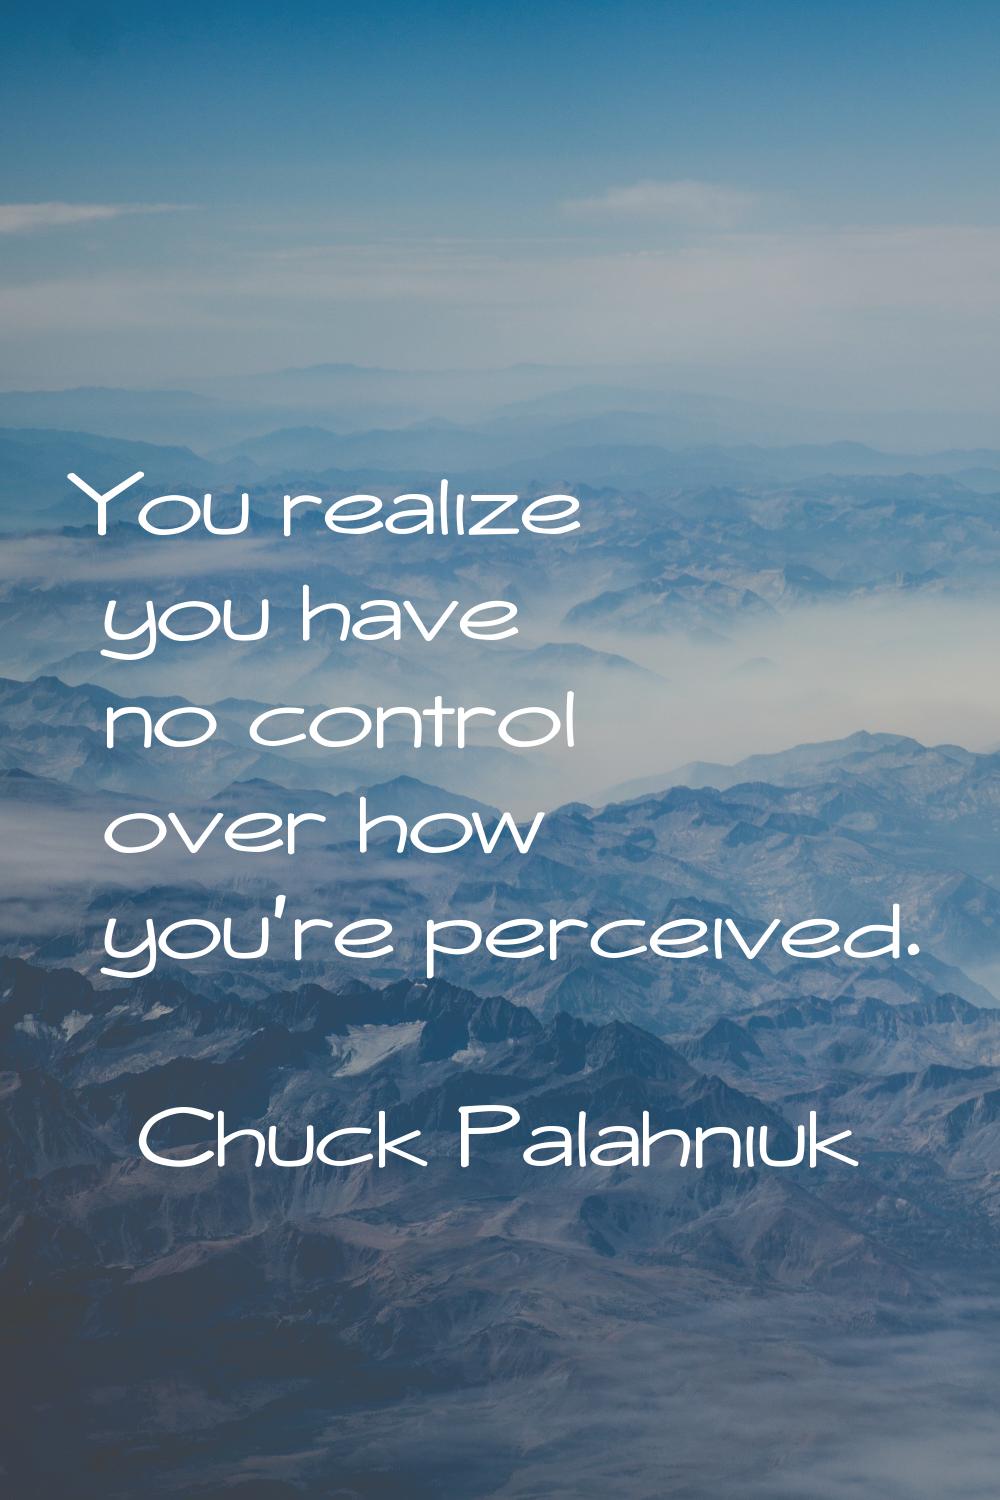 You realize you have no control over how you're perceived.